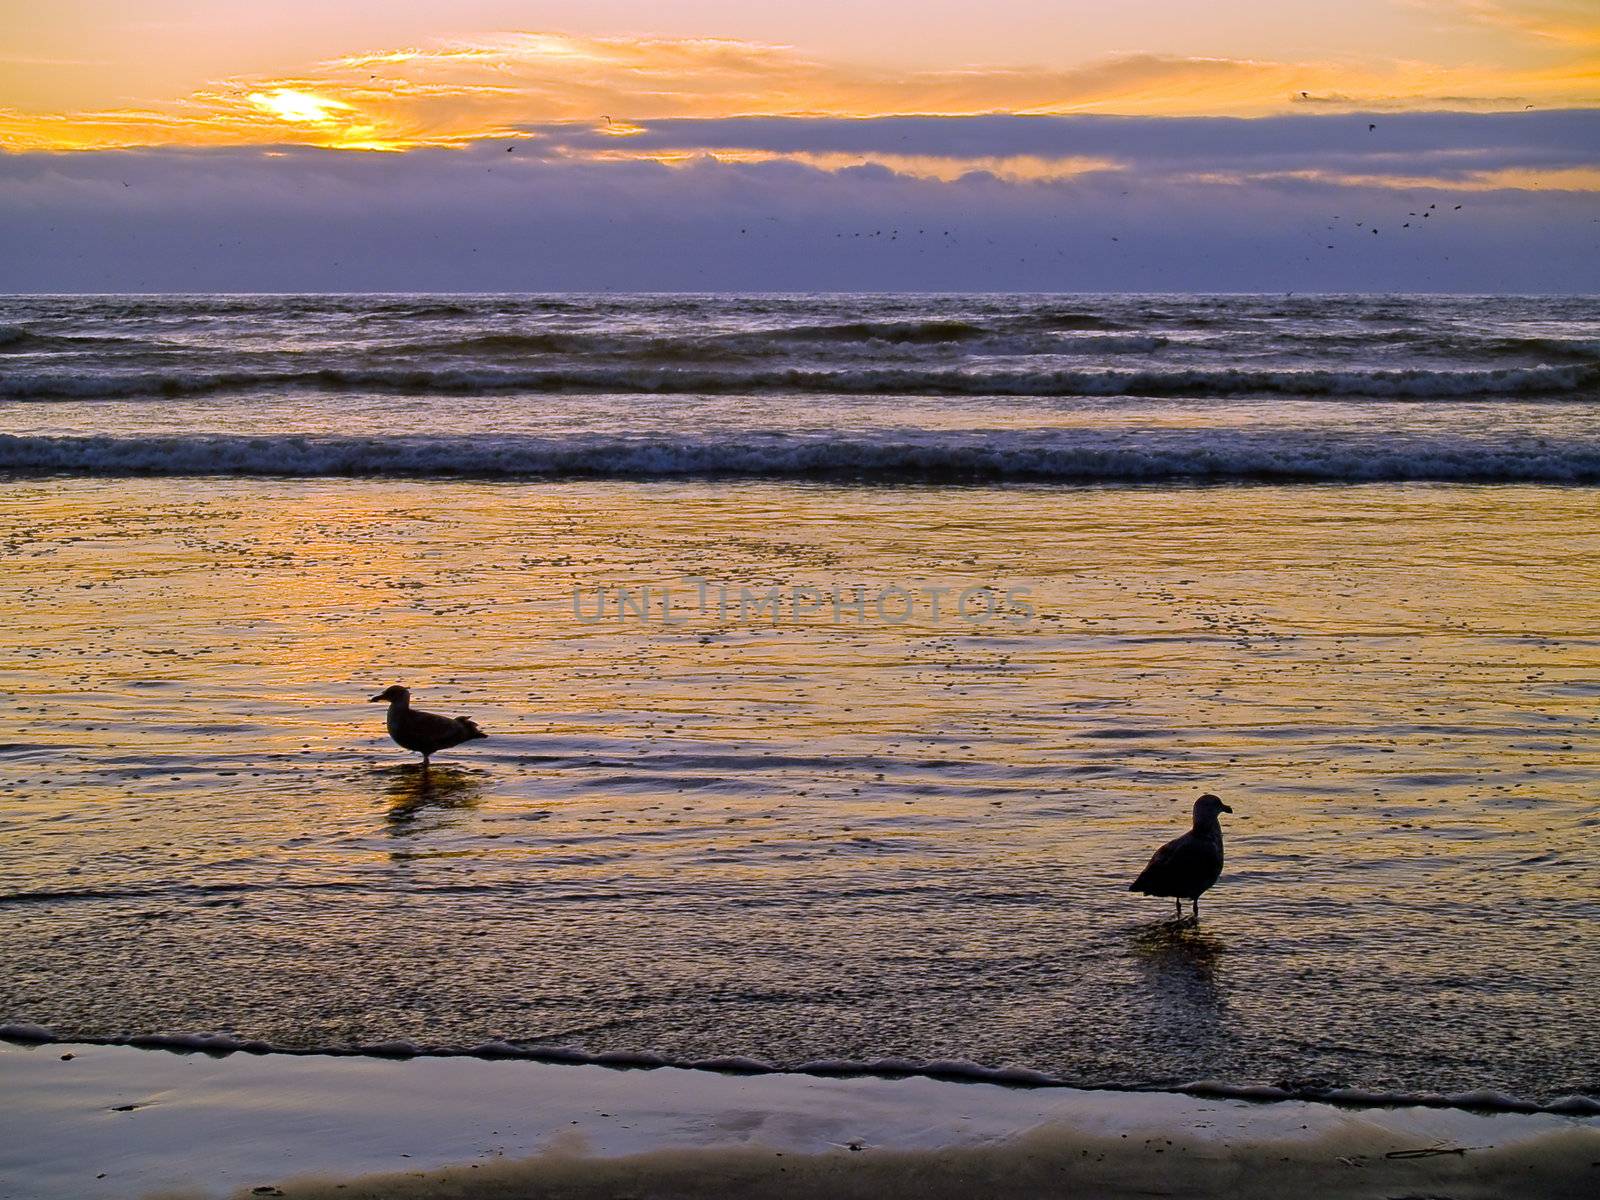 Two Seagulls at the Ocean's Shore at Sunset by Frankljunior